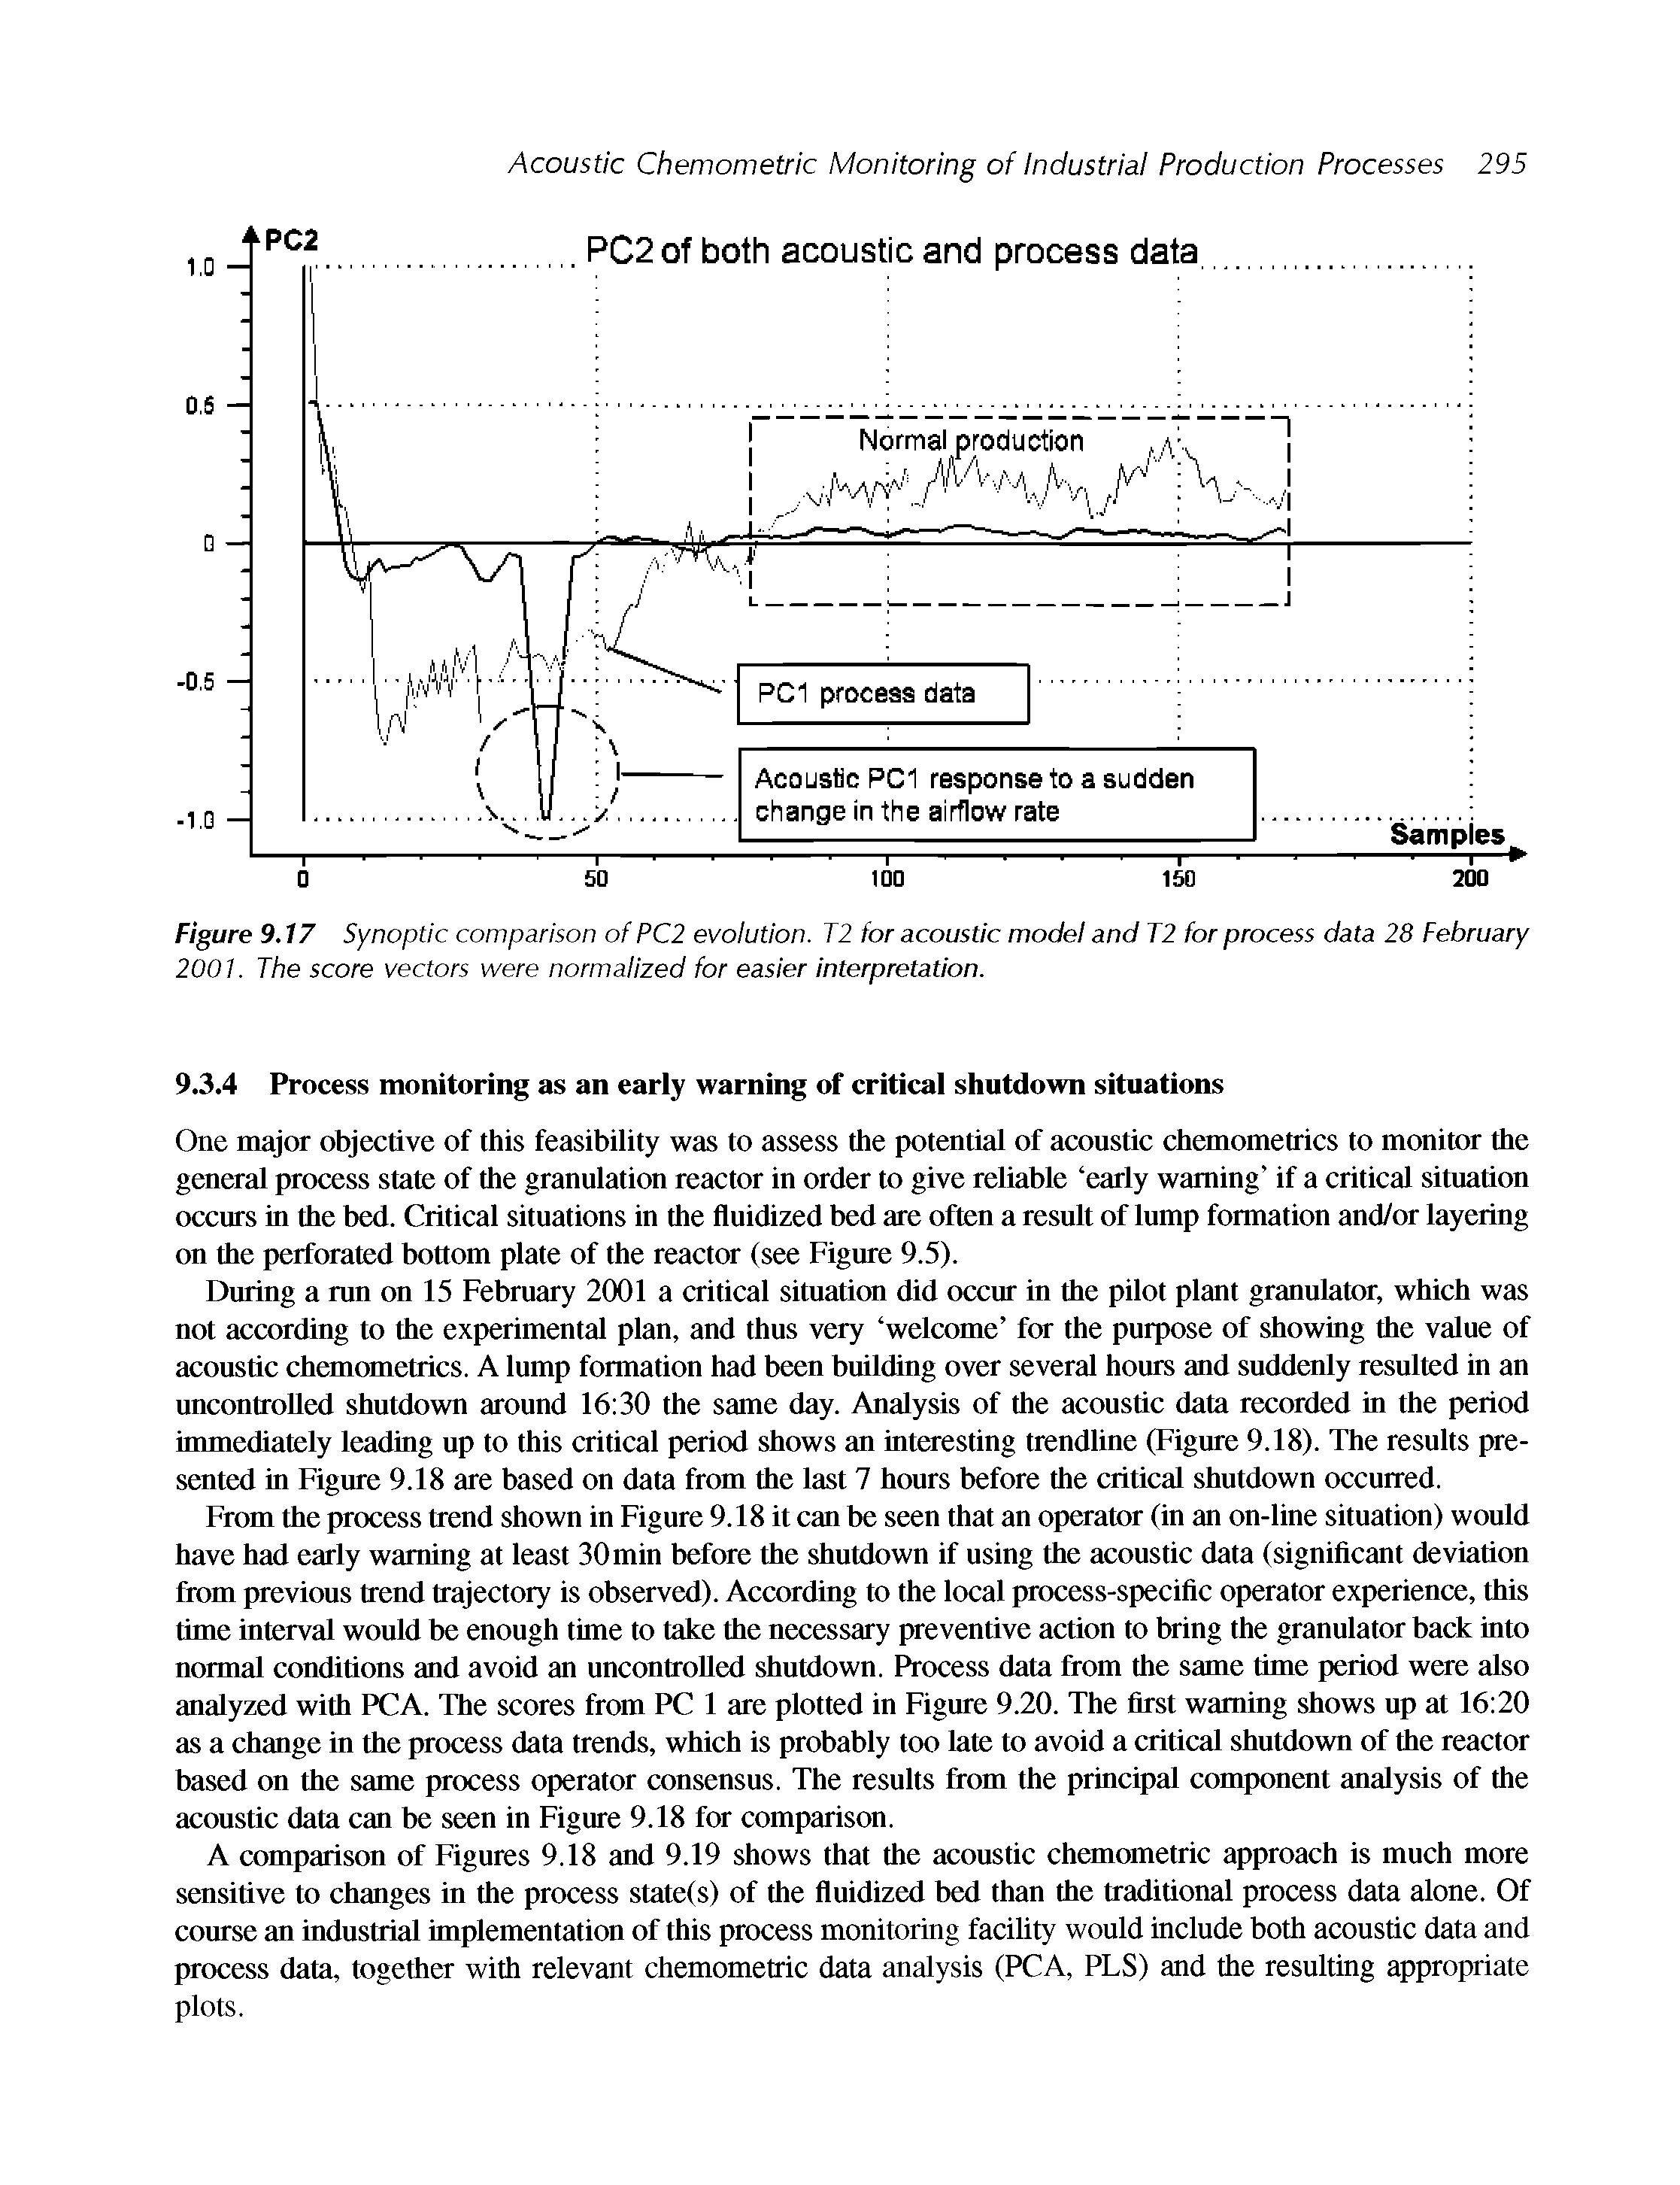 Figure 9.17 Synoptic comparison of PC2 evoiution. T2 for acoustic model and T2 for process data 28 February 2001. The score vectors were normalized for easier interpretation.